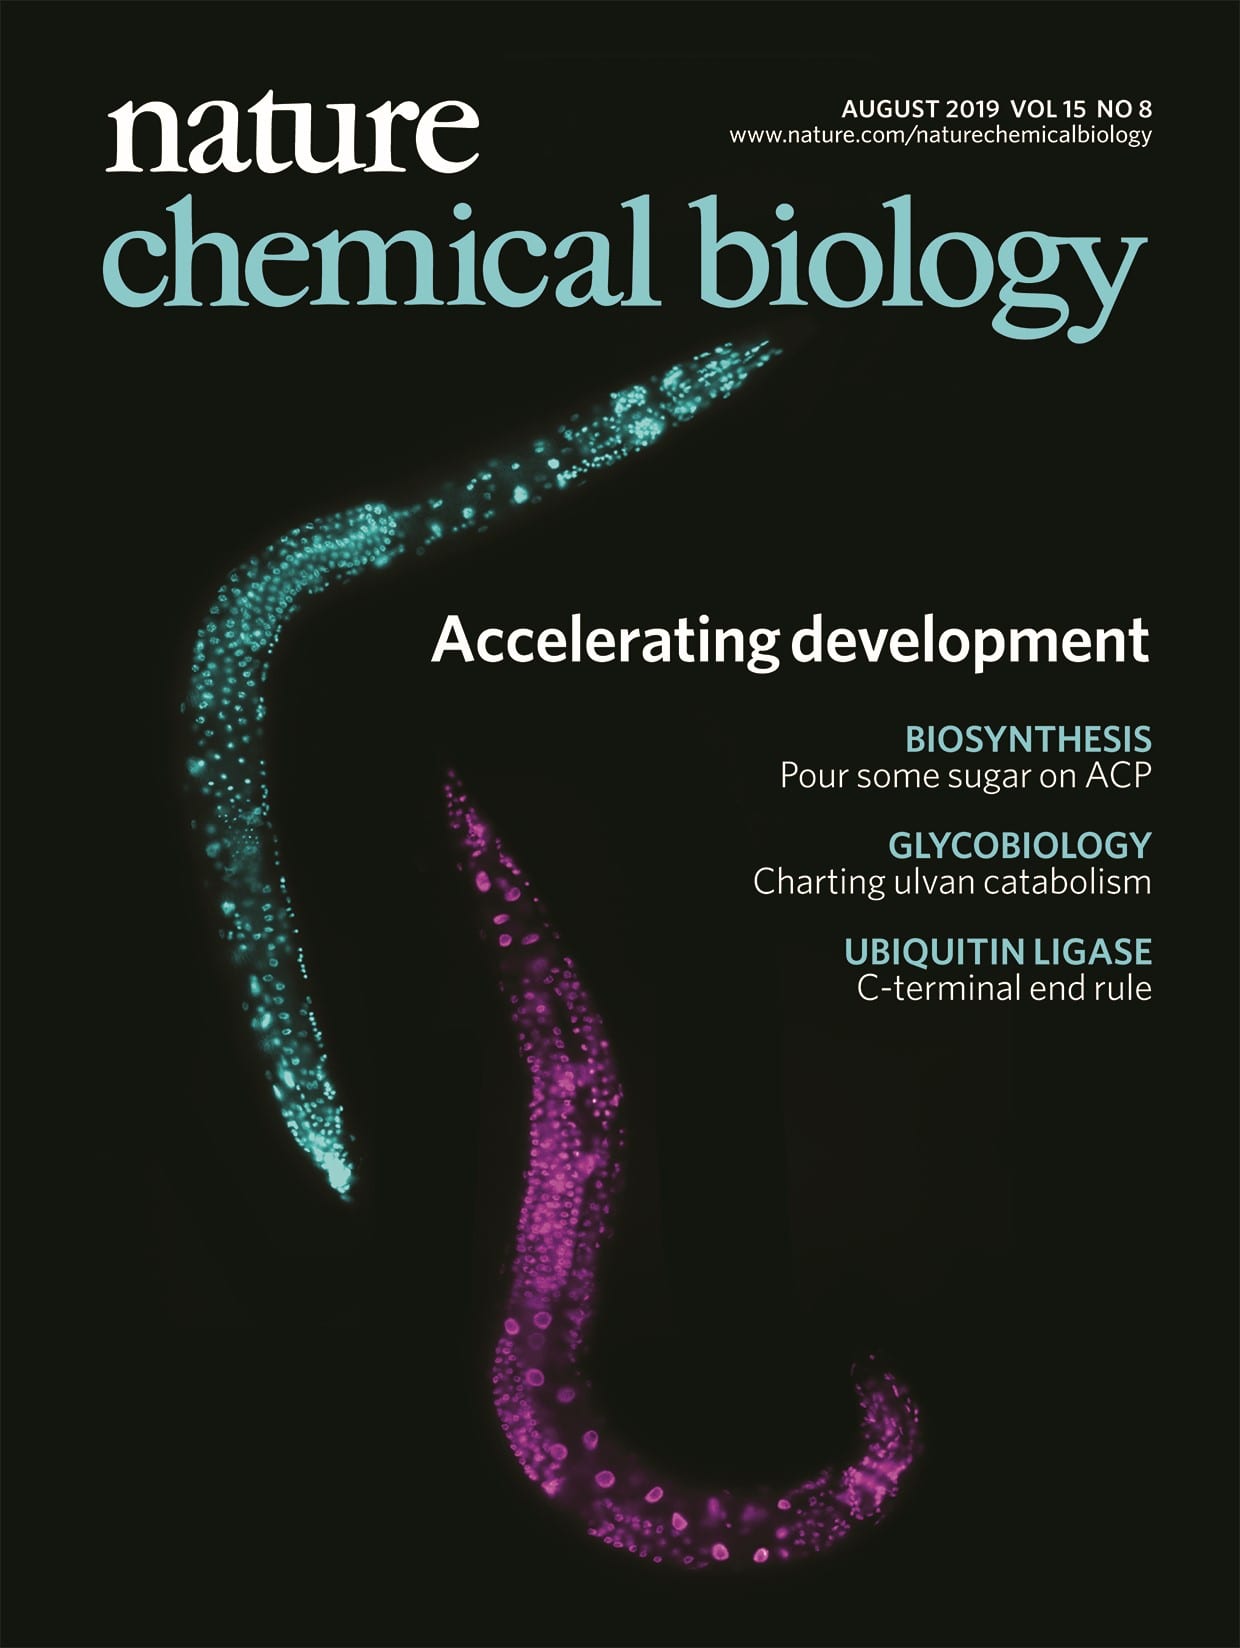 The cover of the August 2019 issue of Nature Chemical Biology, showing adult male (aqua colored) and hermaphrodite (magenta colored) Caenorhabditis elegans. Image: Erin Z. Aprison. Cover Design: Erin Dewalt.